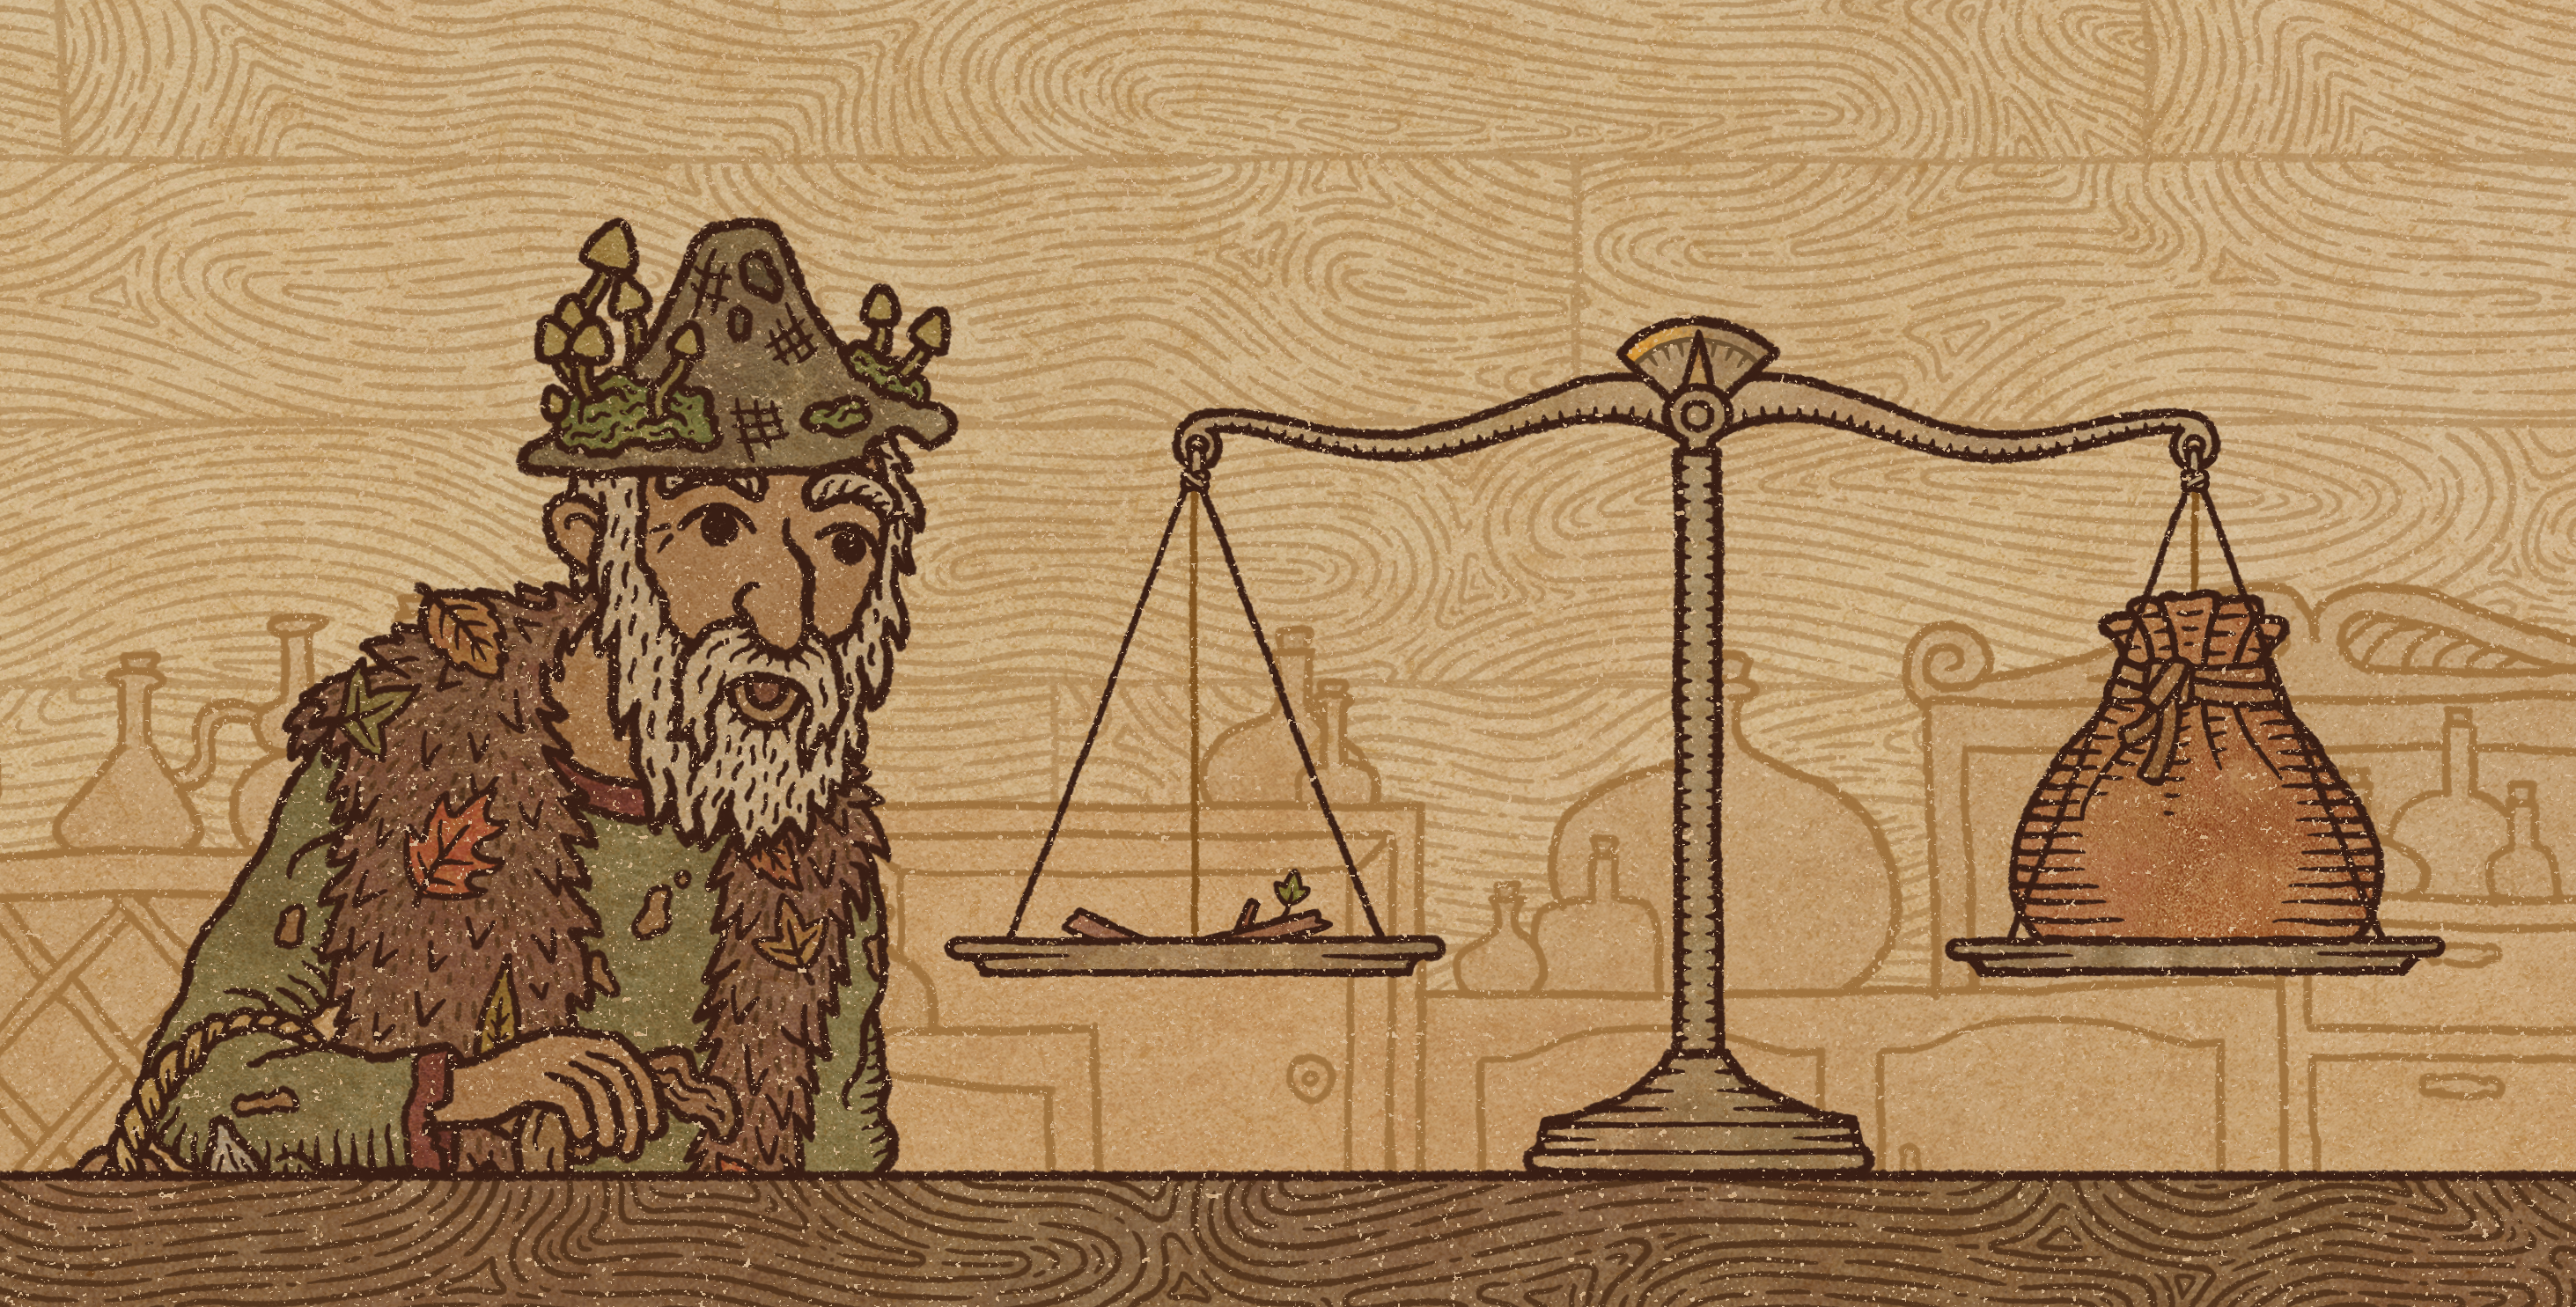 Potion Craft Alchemist Simulator game artwork featuring a bearded alchemist with a potion-studded hat beside a balance scale and potion flasks, perfect as a HD desktop wallpaper or background.